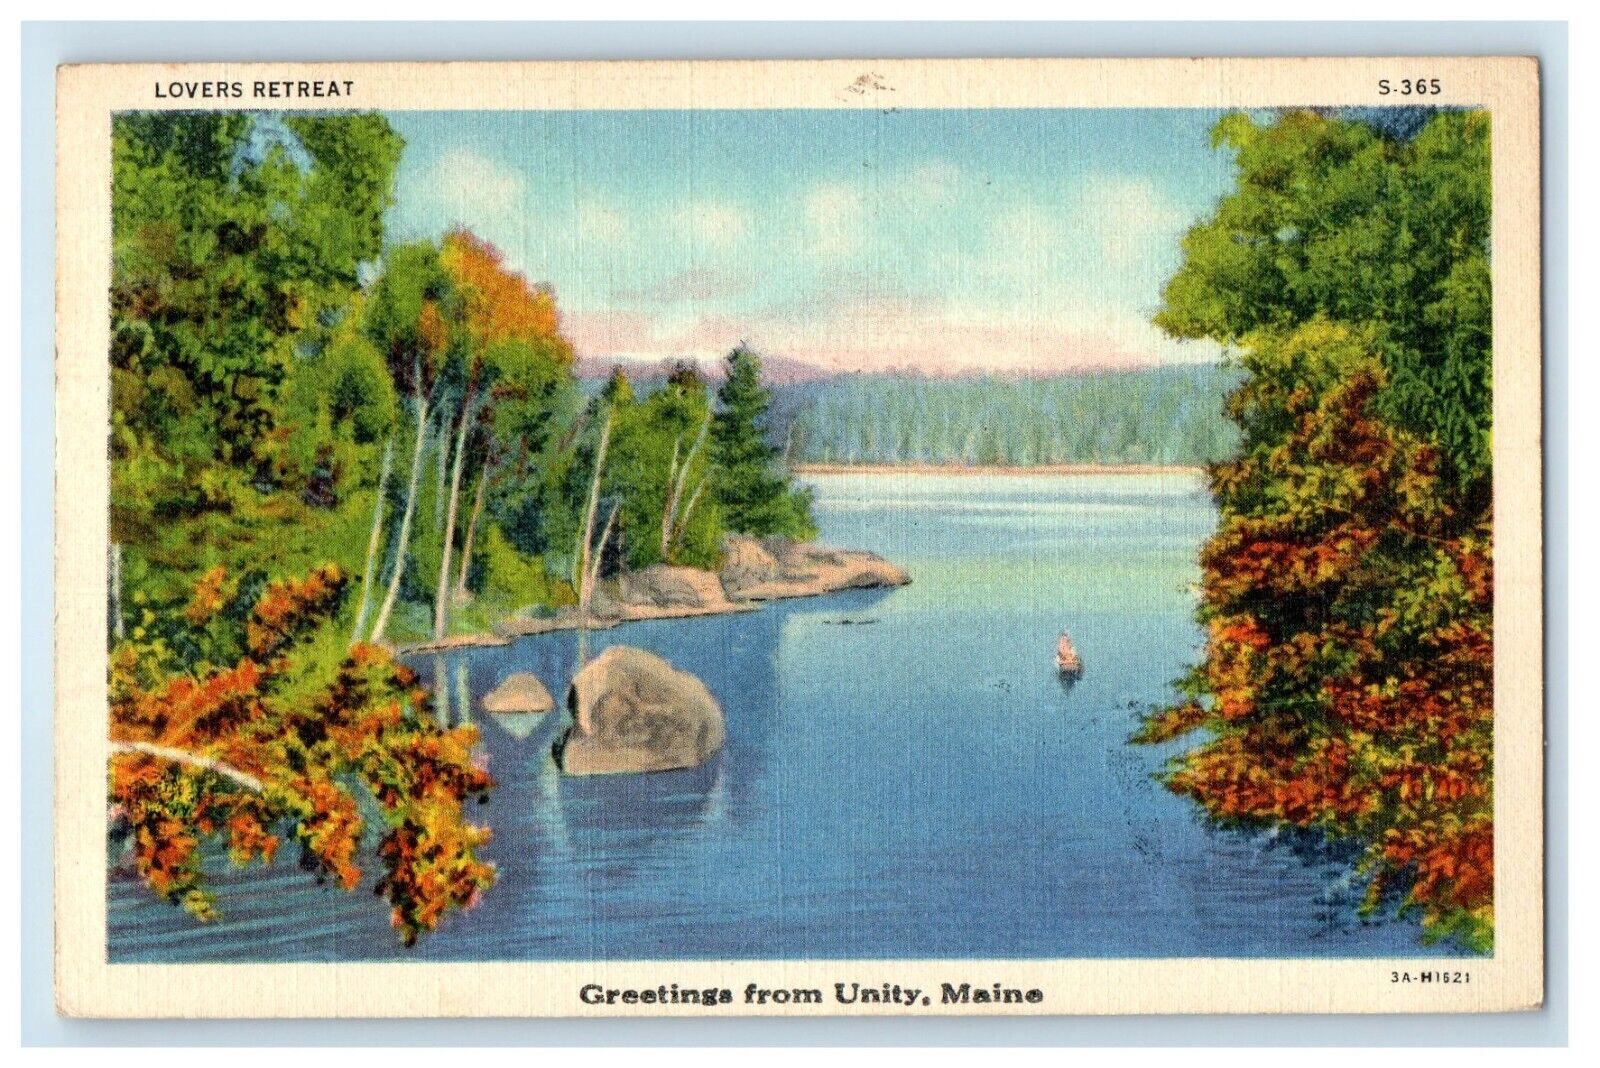 1940 Greetings From Unity Maine ME, Lovers Retreat Boat Sea View Postcard